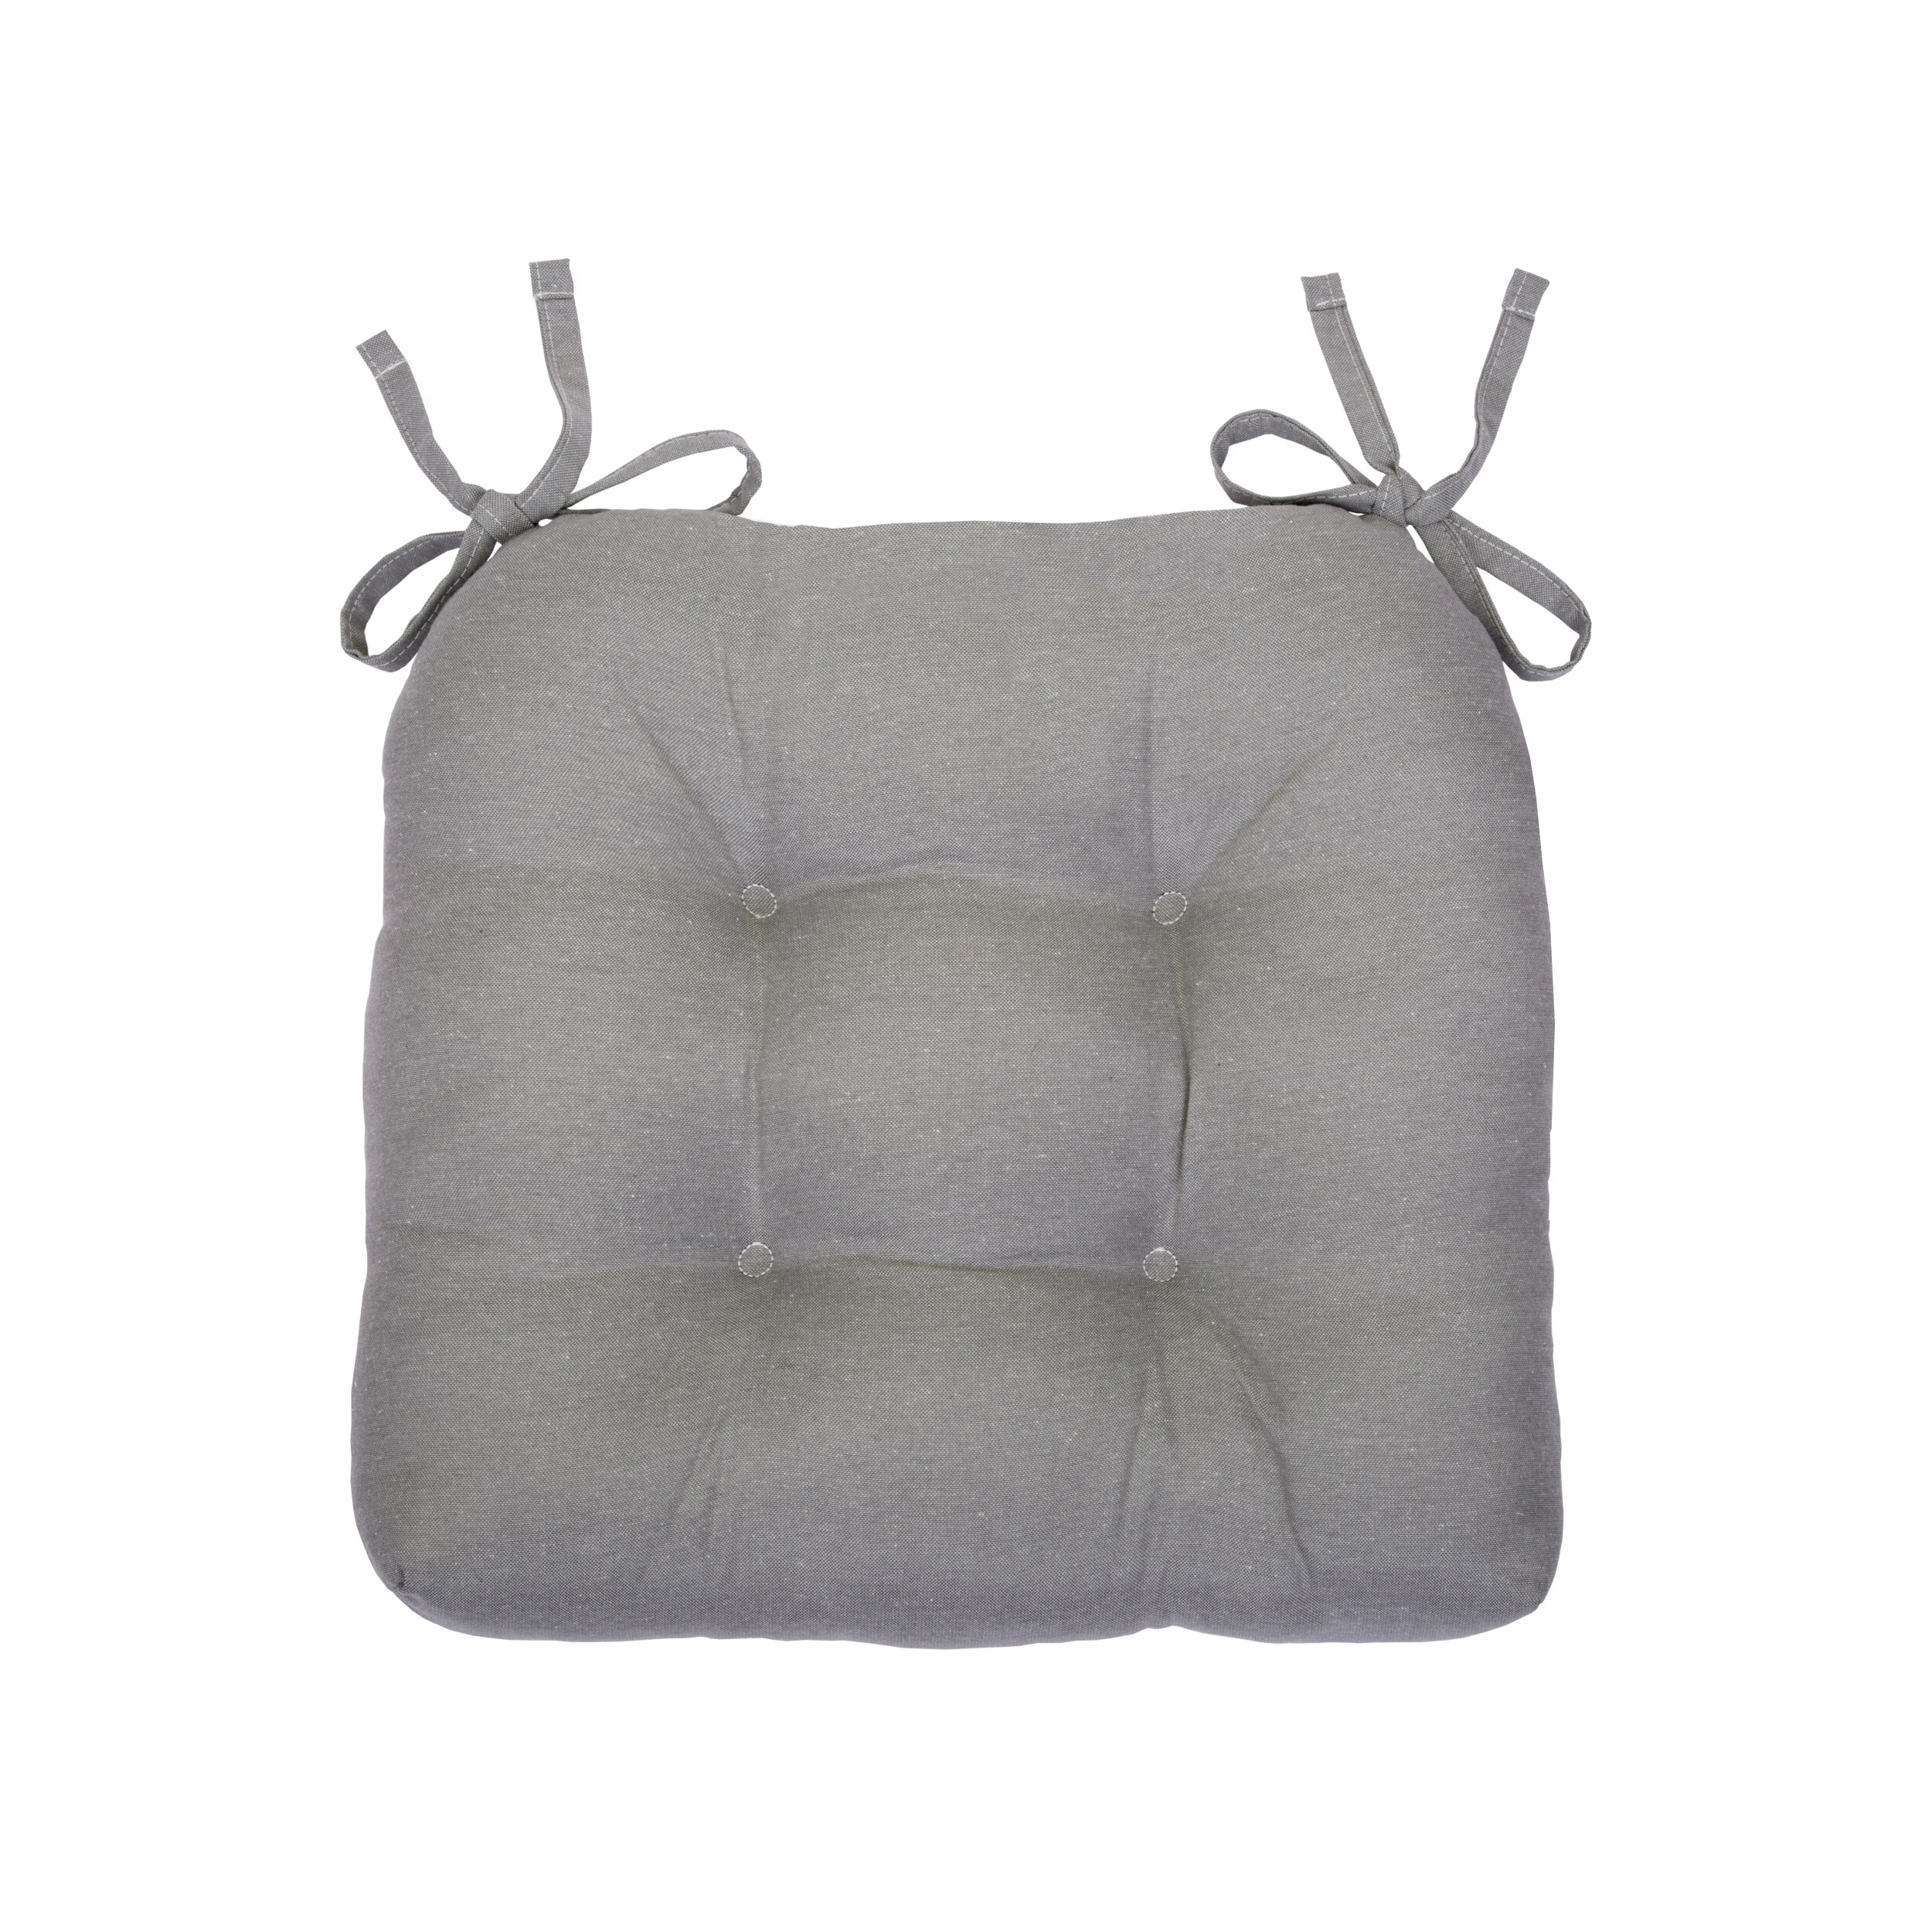 https://ak1.ostkcdn.com/images/products/is/images/direct/1c5263ccb5ec6b303c6f2d71bd2eb6a905837c8c/Chase-Tufted-Chair-Seat-Cushions---Set-of-Two.jpg